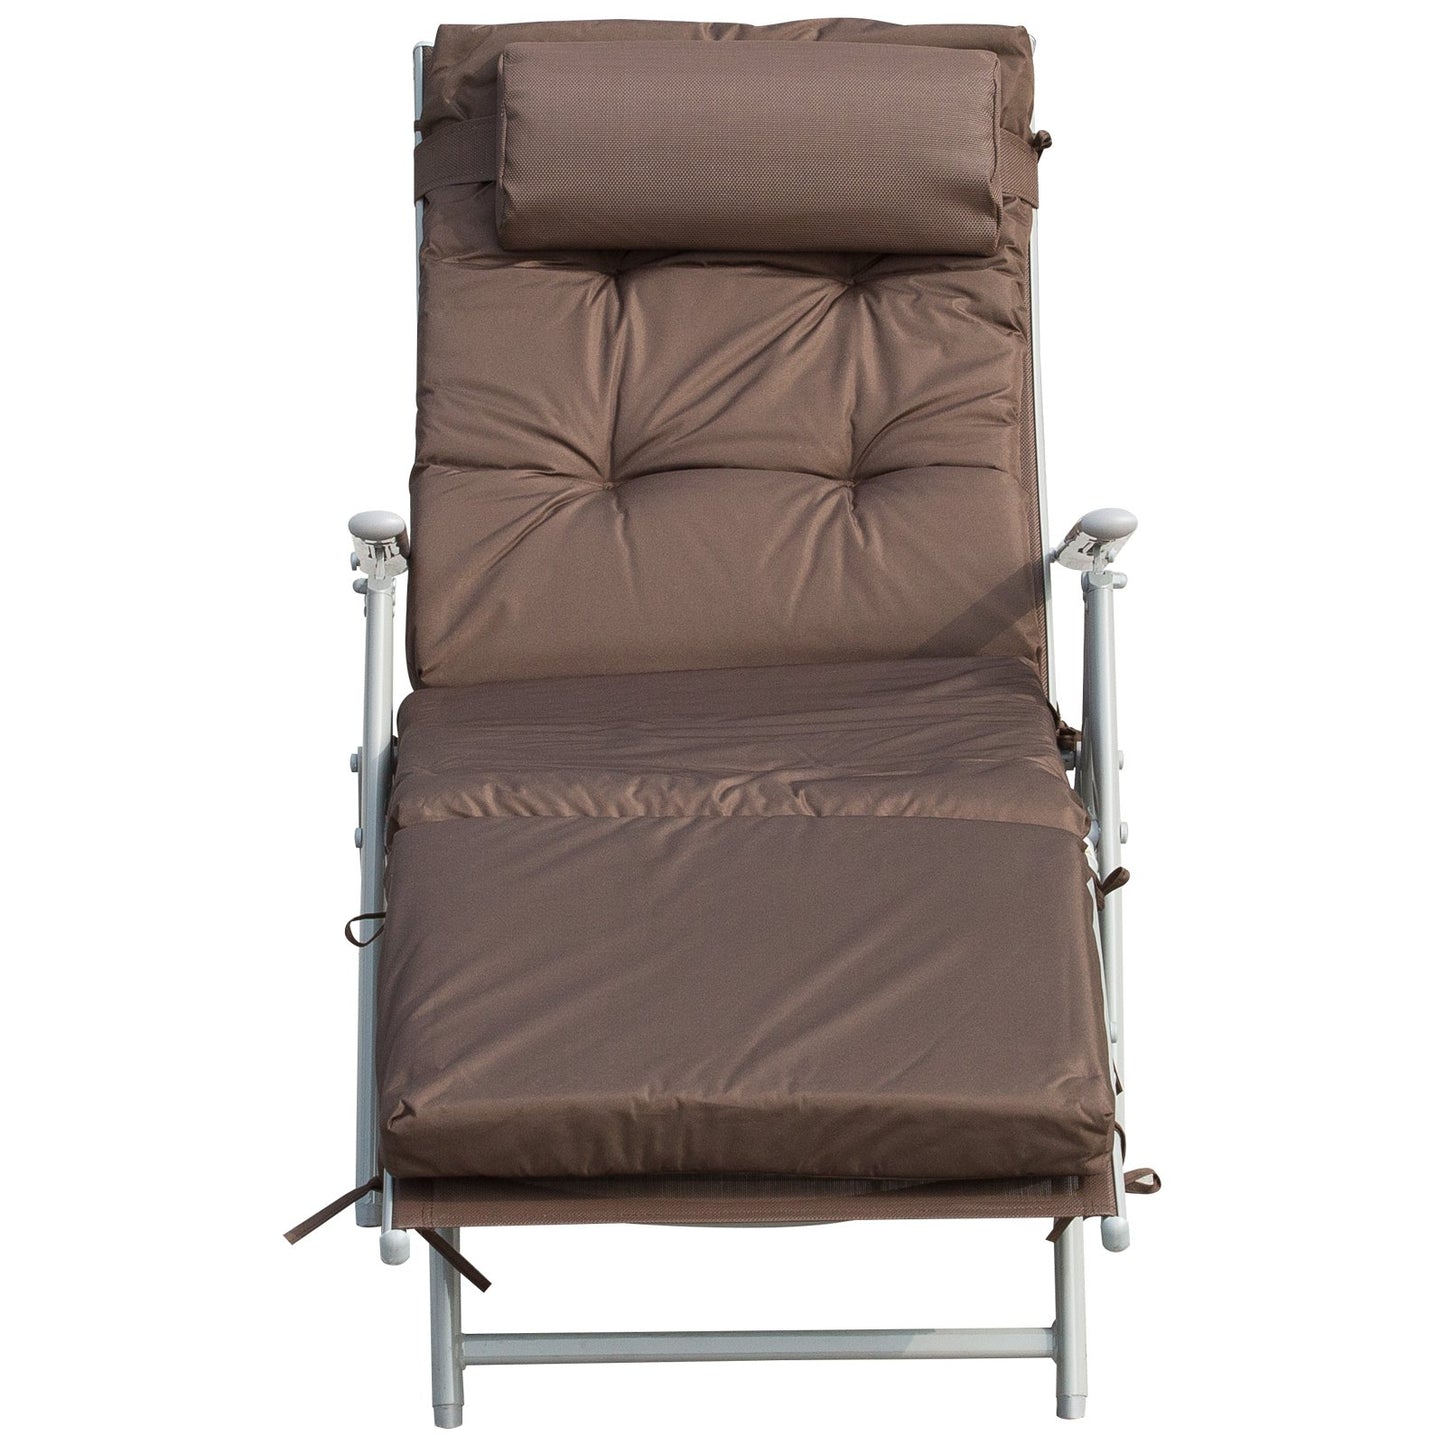 Outsunny Steel Frame Outdoor Garden Padded Sun Lounger w/ Pillow Brown